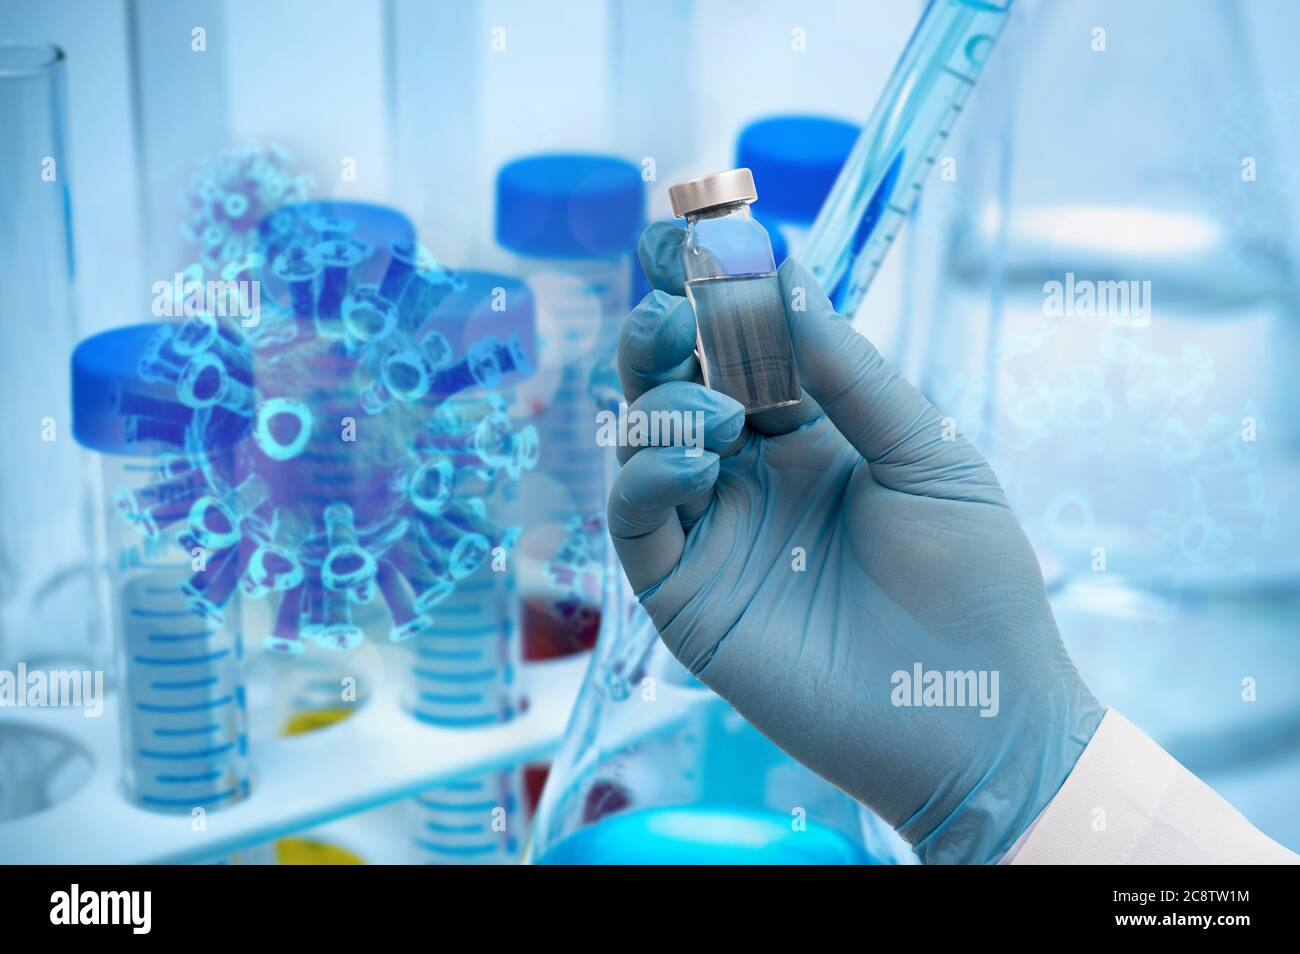 The scientist's hand holding the Covid-19 vaccine with blue gloves in the background of the biotechnology concept. Stock Photo